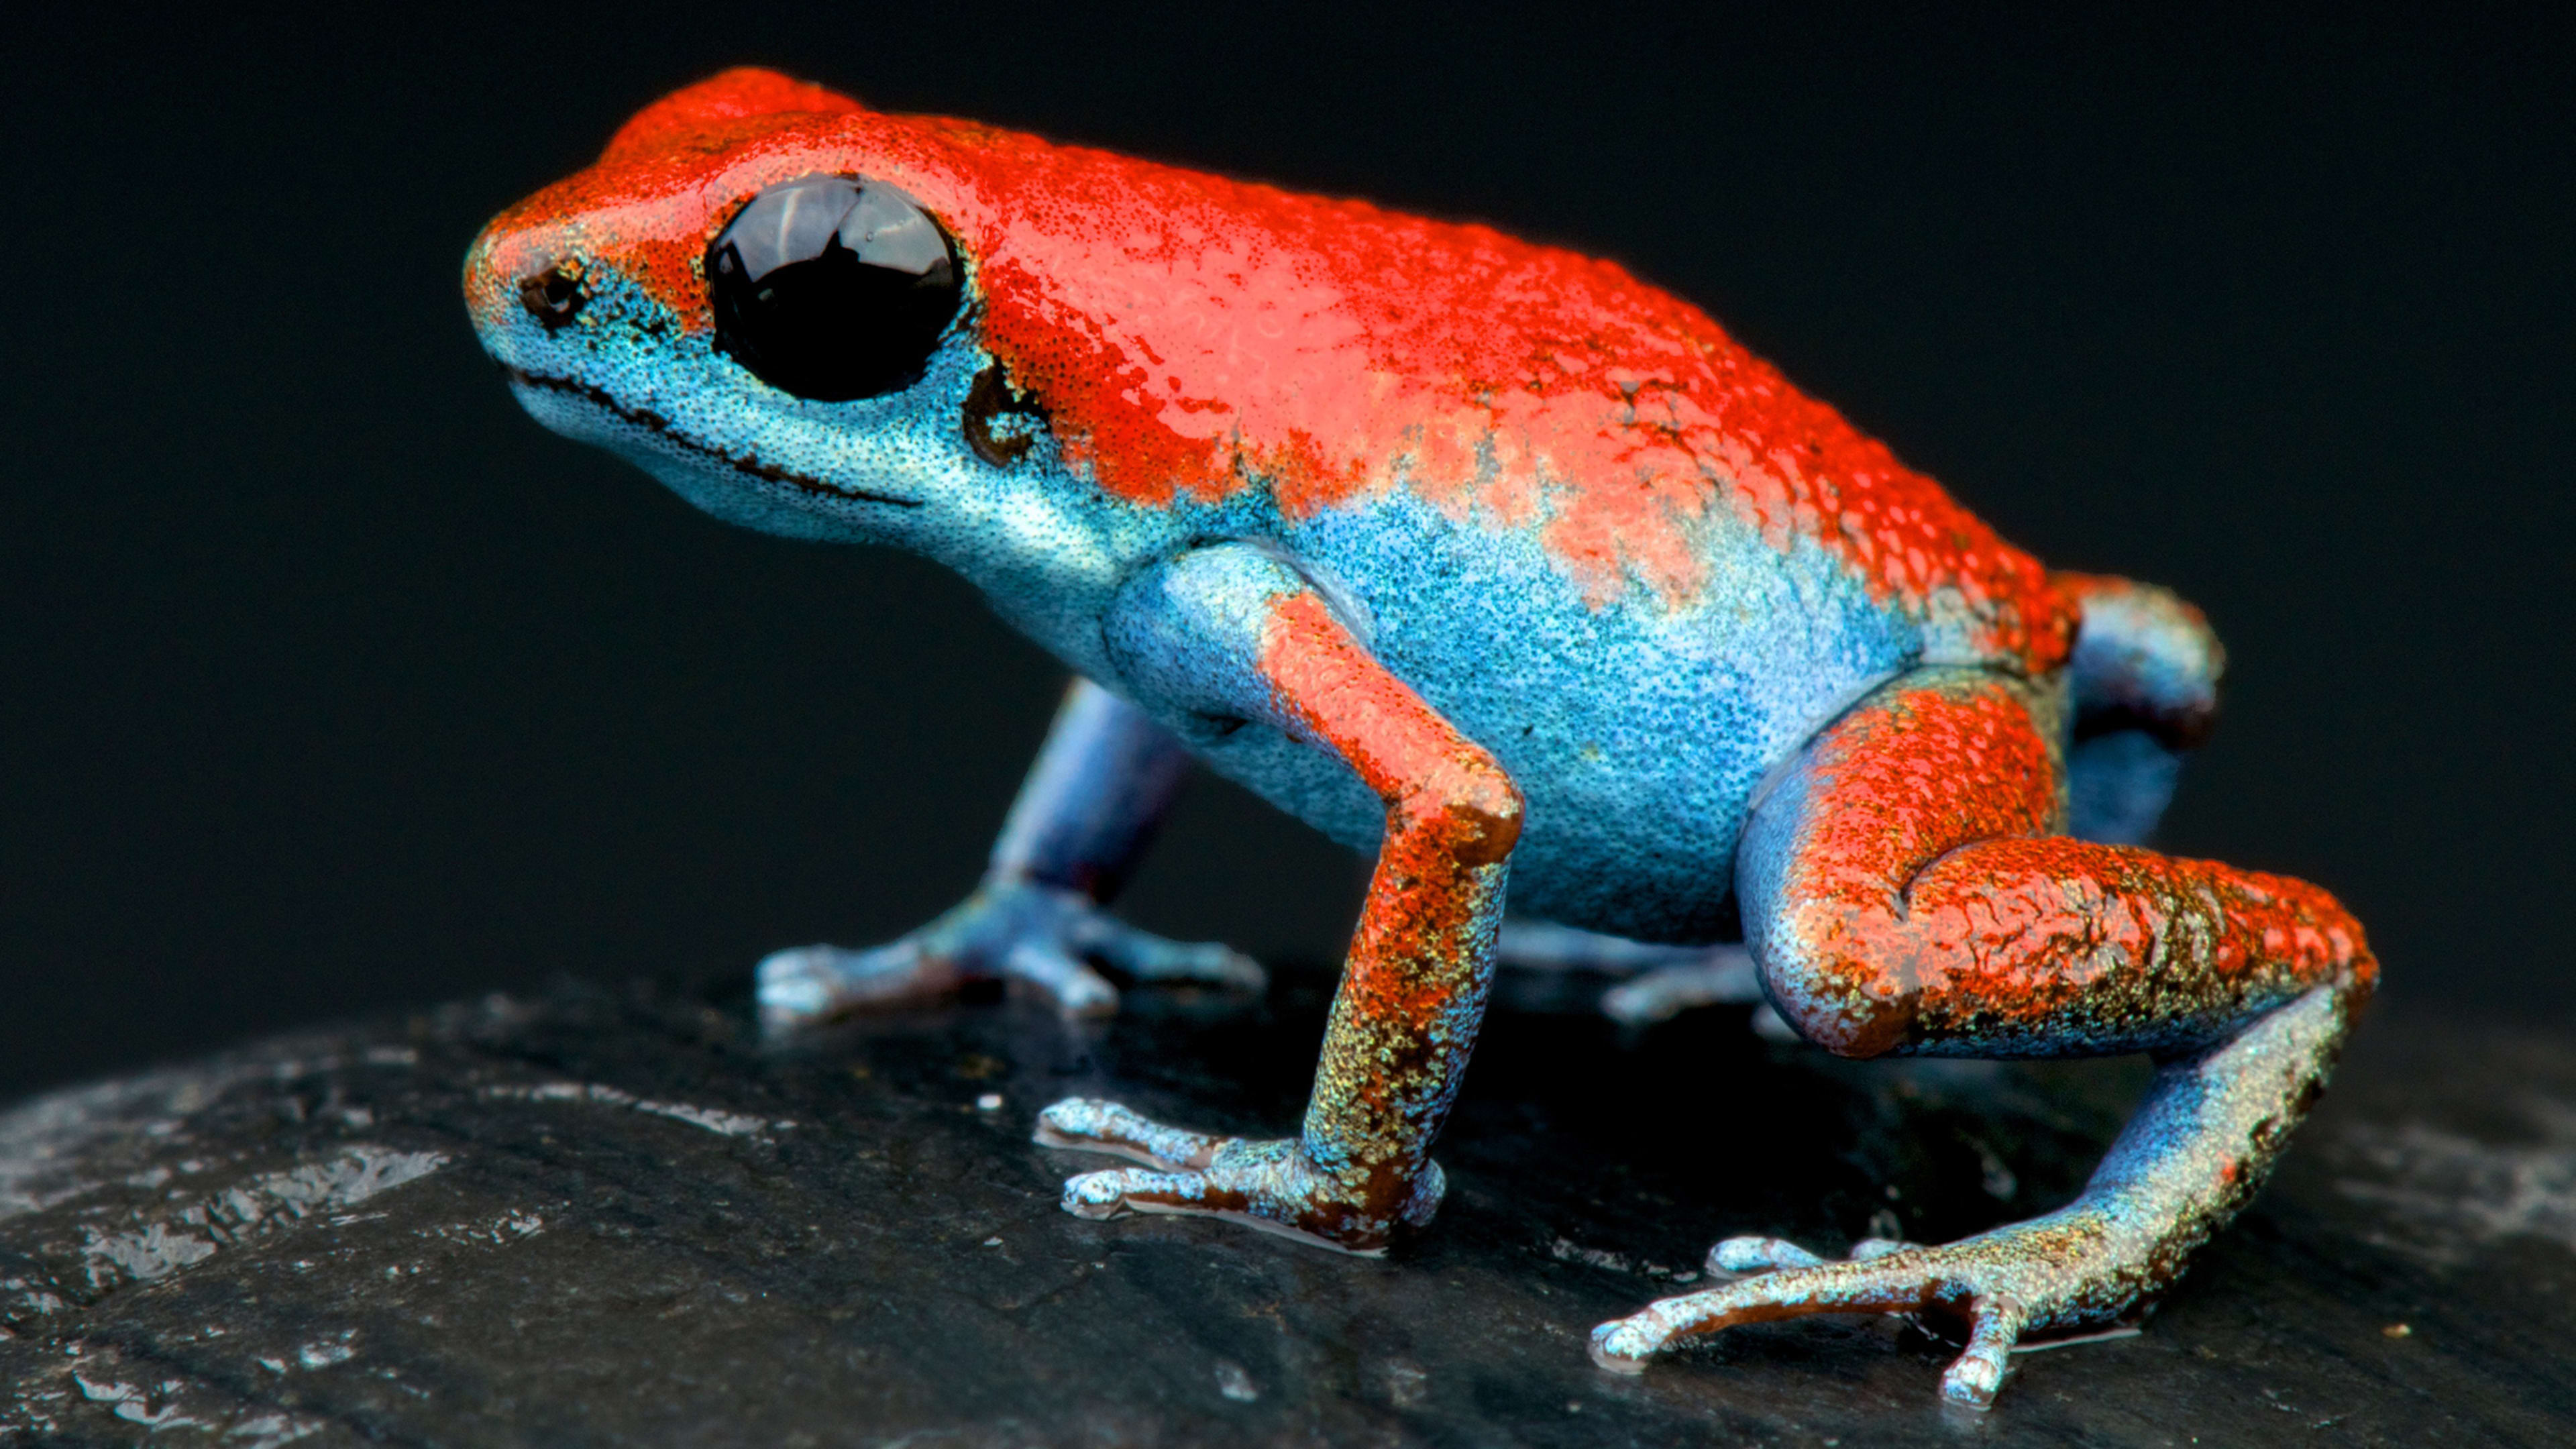 Check out these gorgeous rare amphibians, because they might soon be extinct